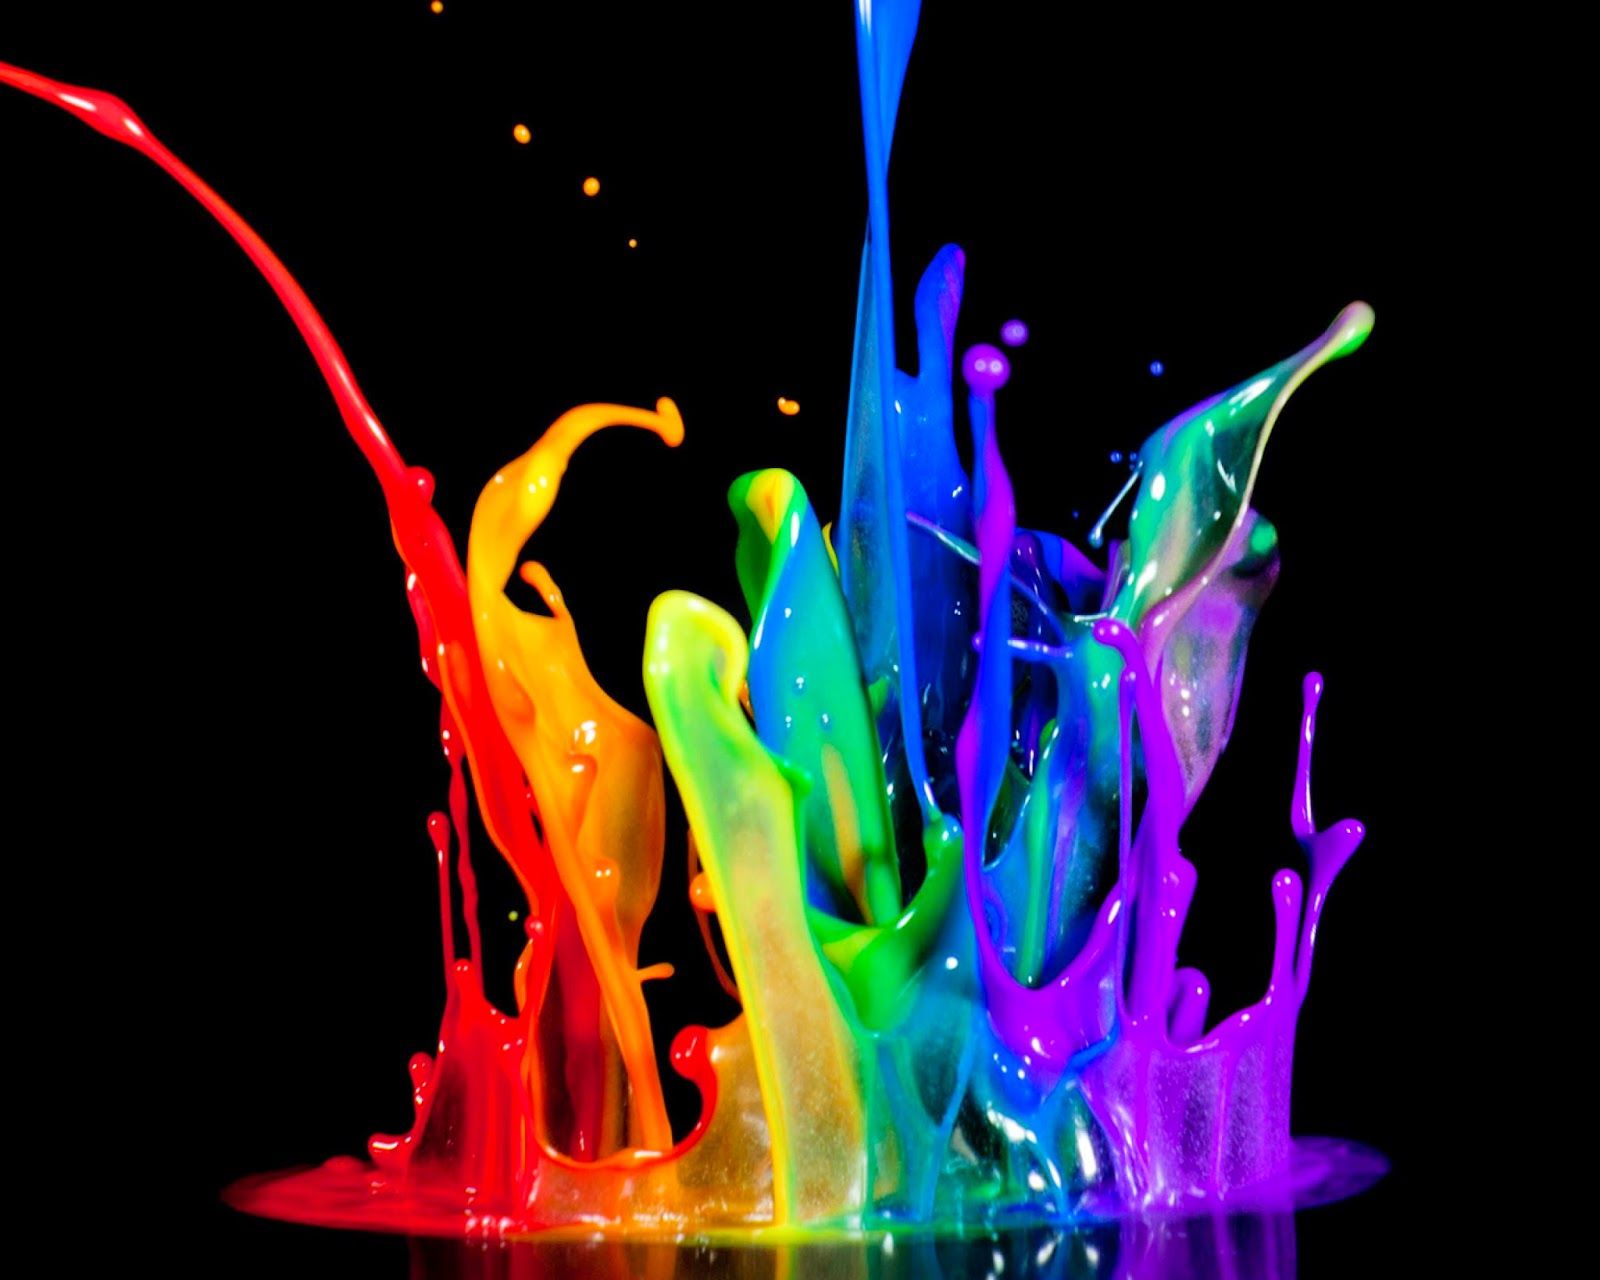 Black Background With Colorful Paint - HD Wallpaper 